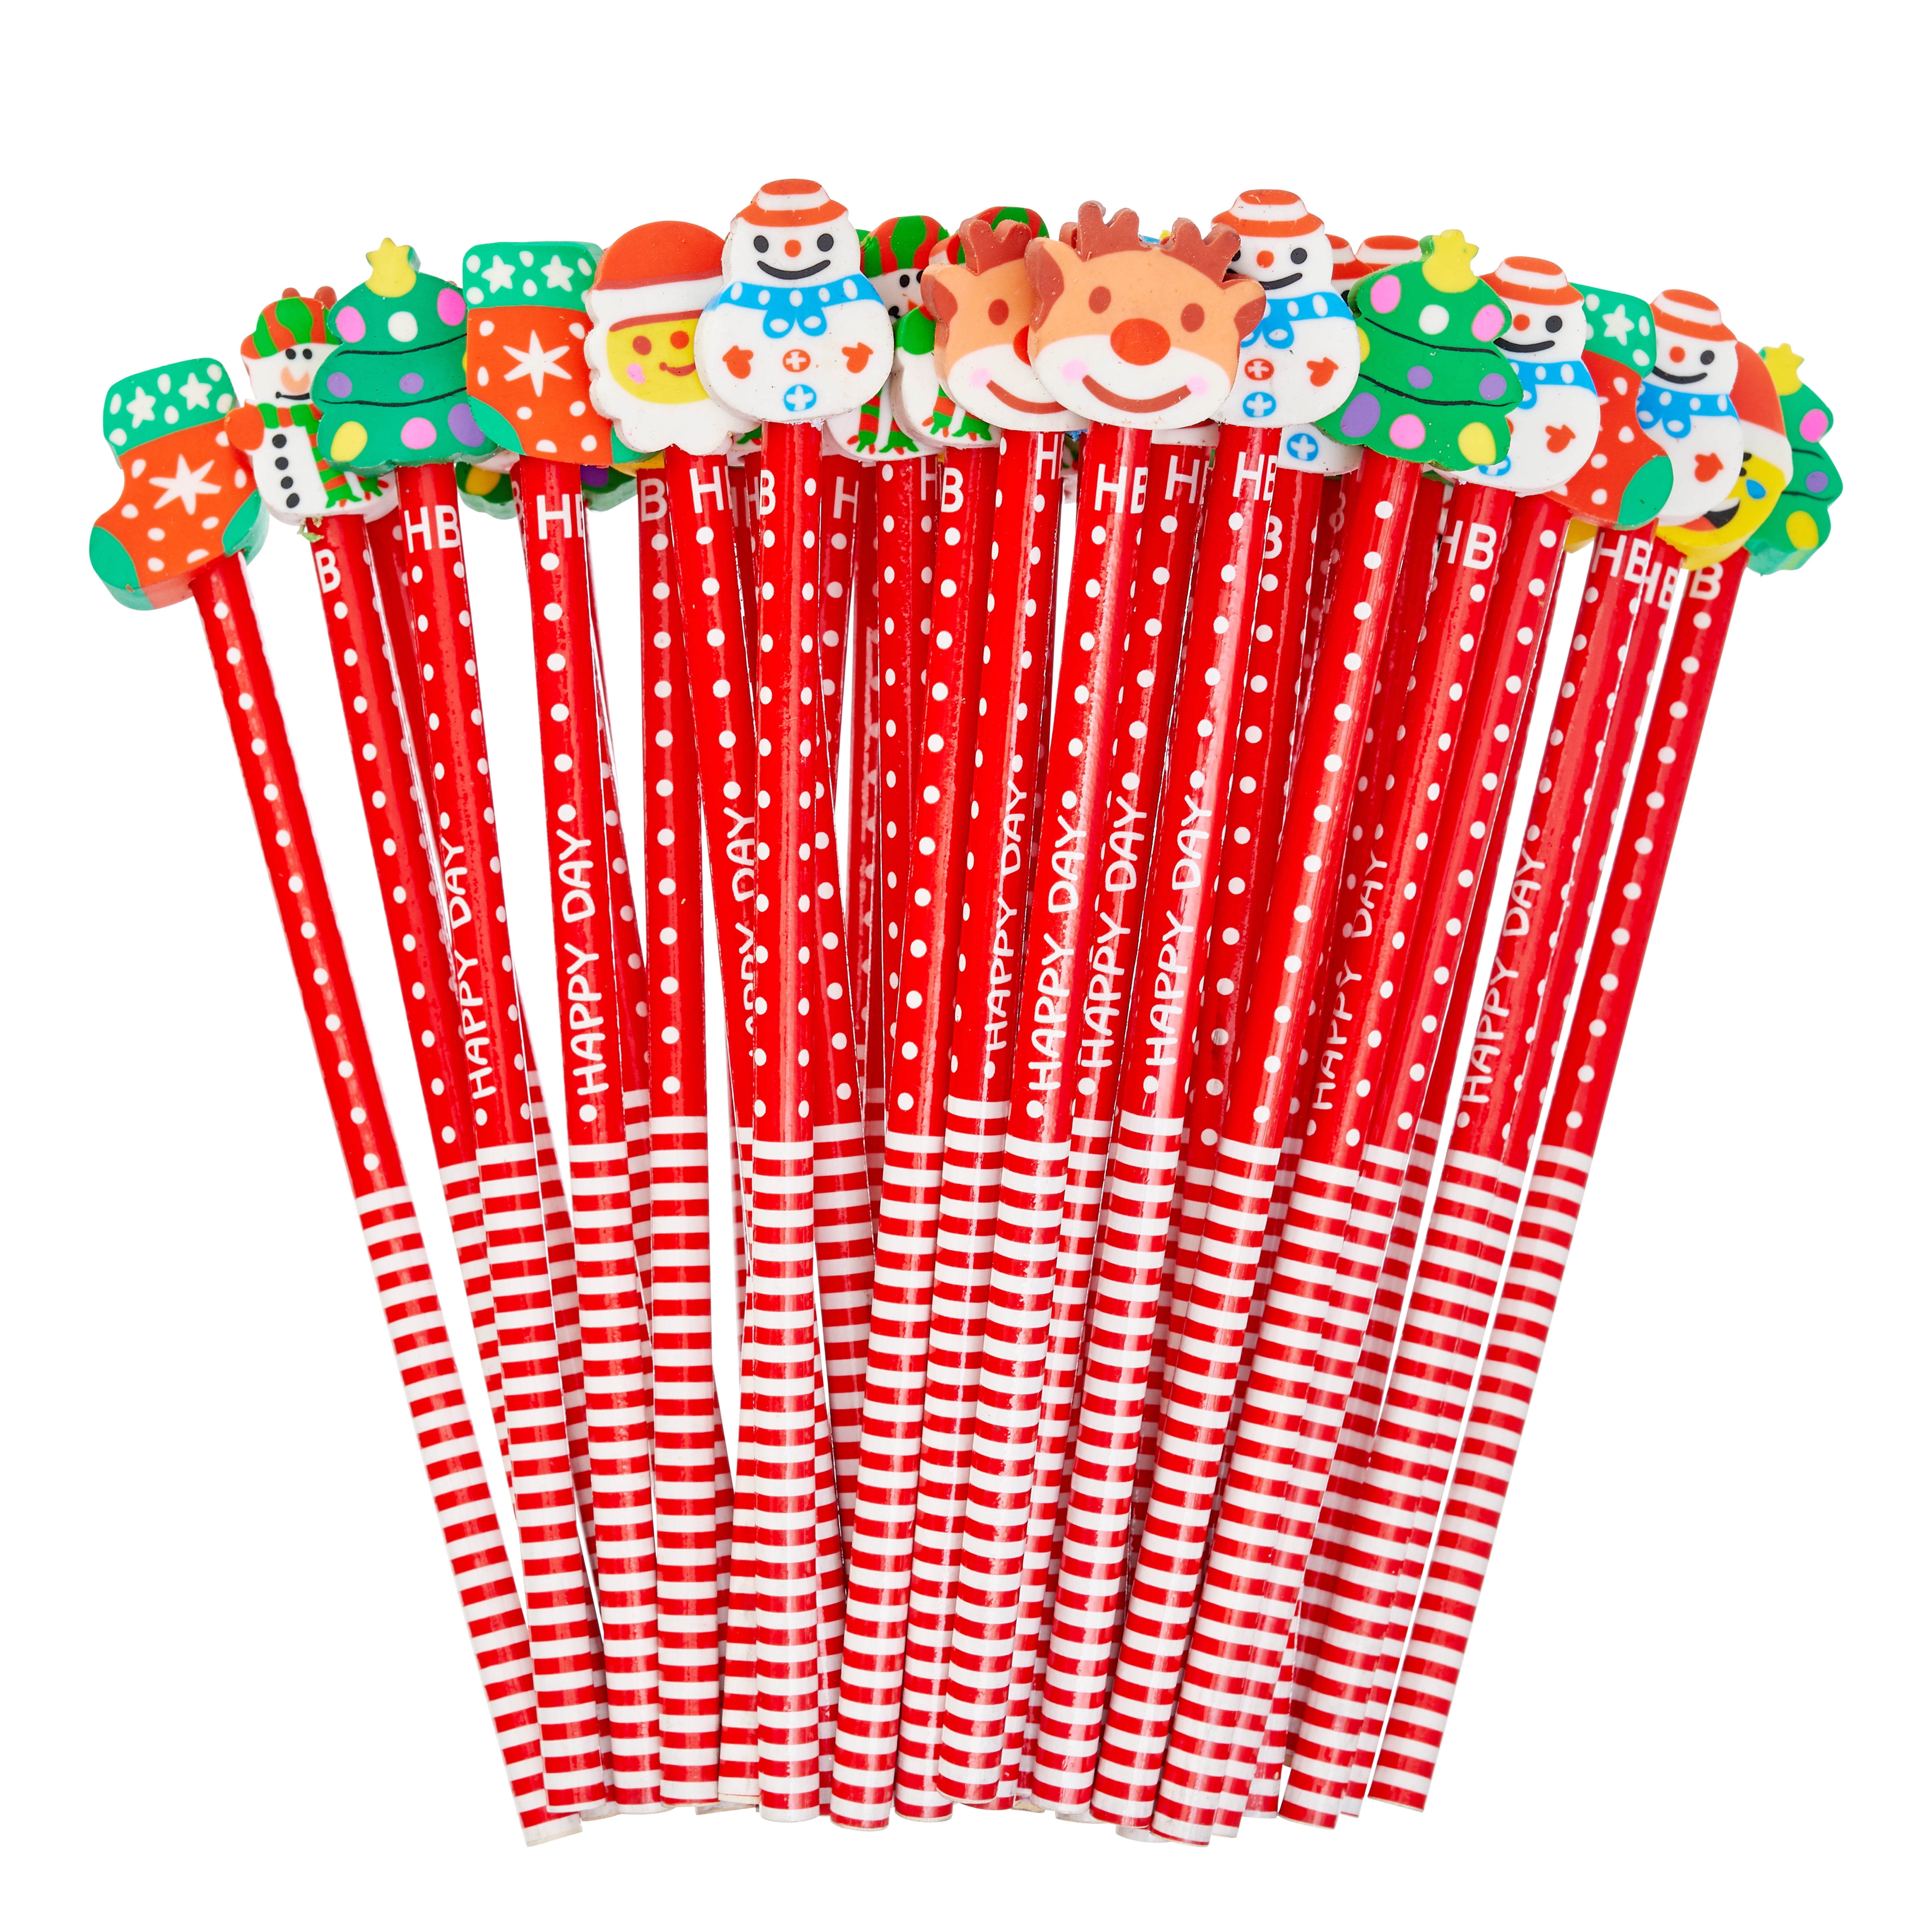 Twiddlers, Party Bag Fillers for Kids